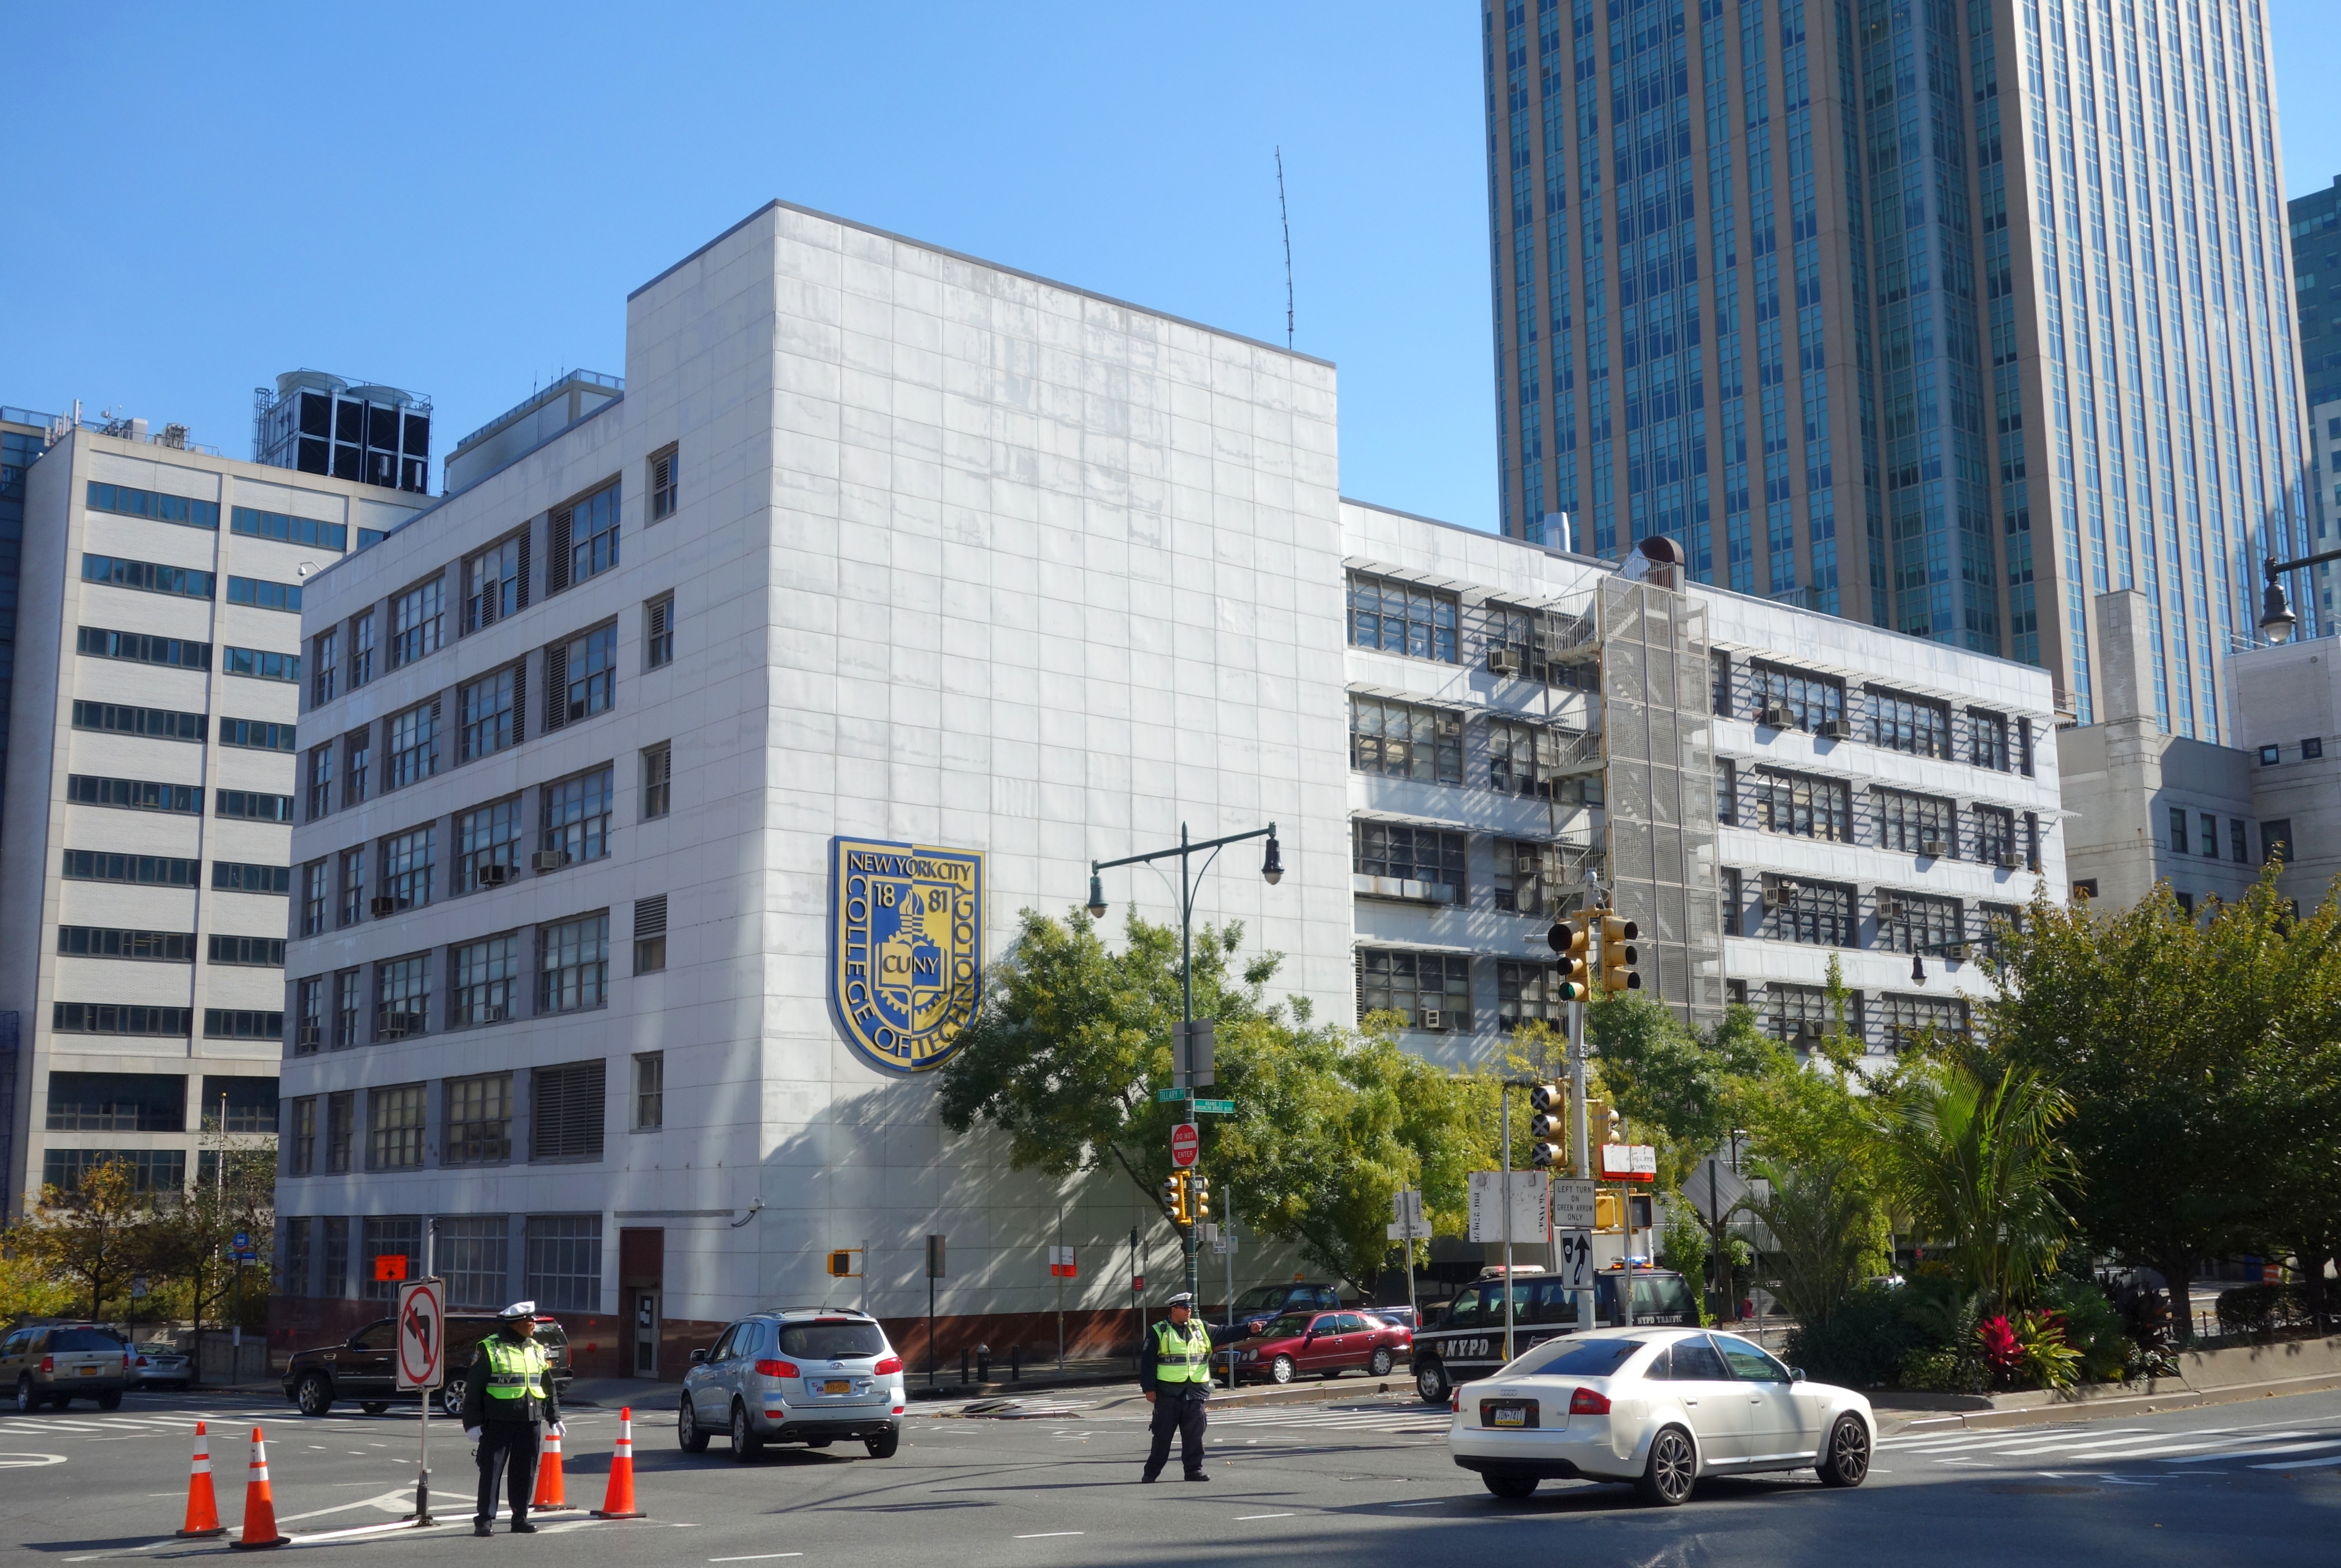 27. CUNY New York City College of Technology